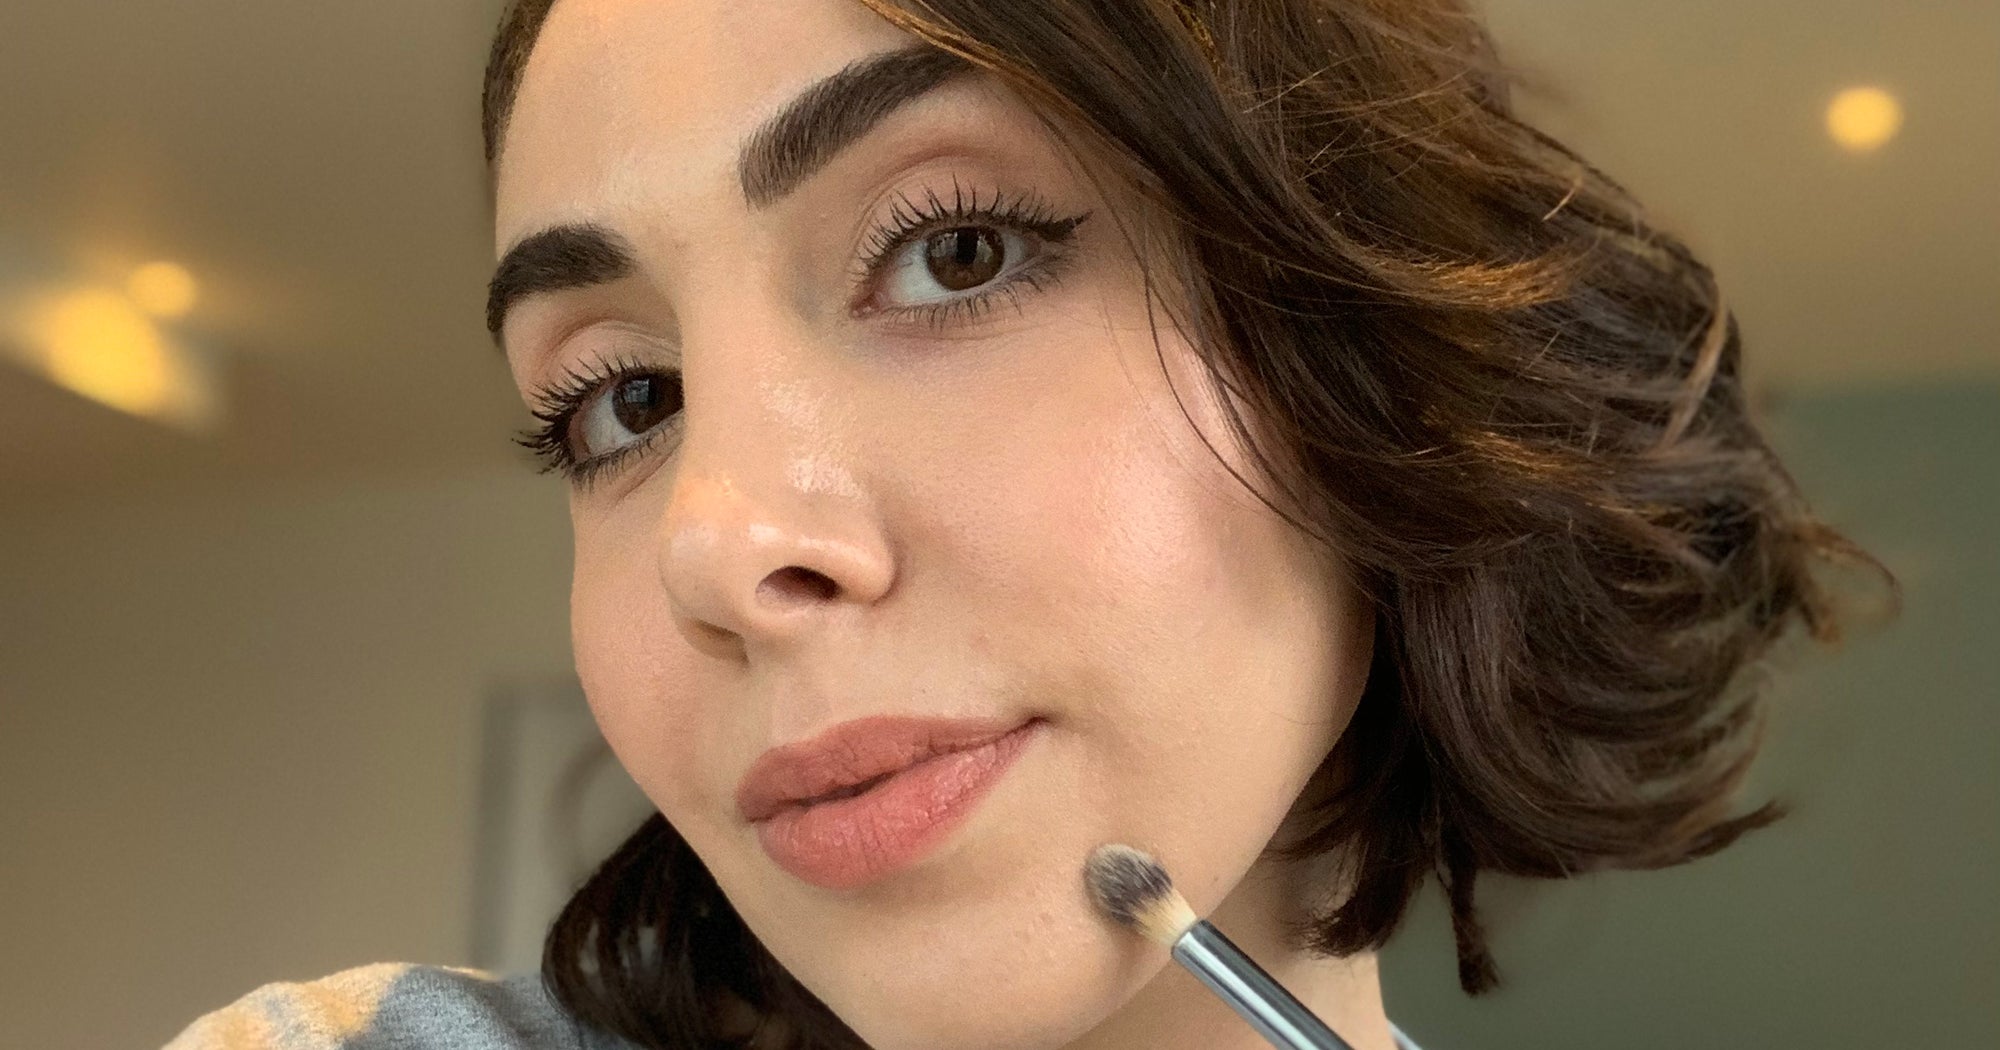 I Tried TikTok’s ‘Model Complexion’ Hack — & Tossed My Foundation